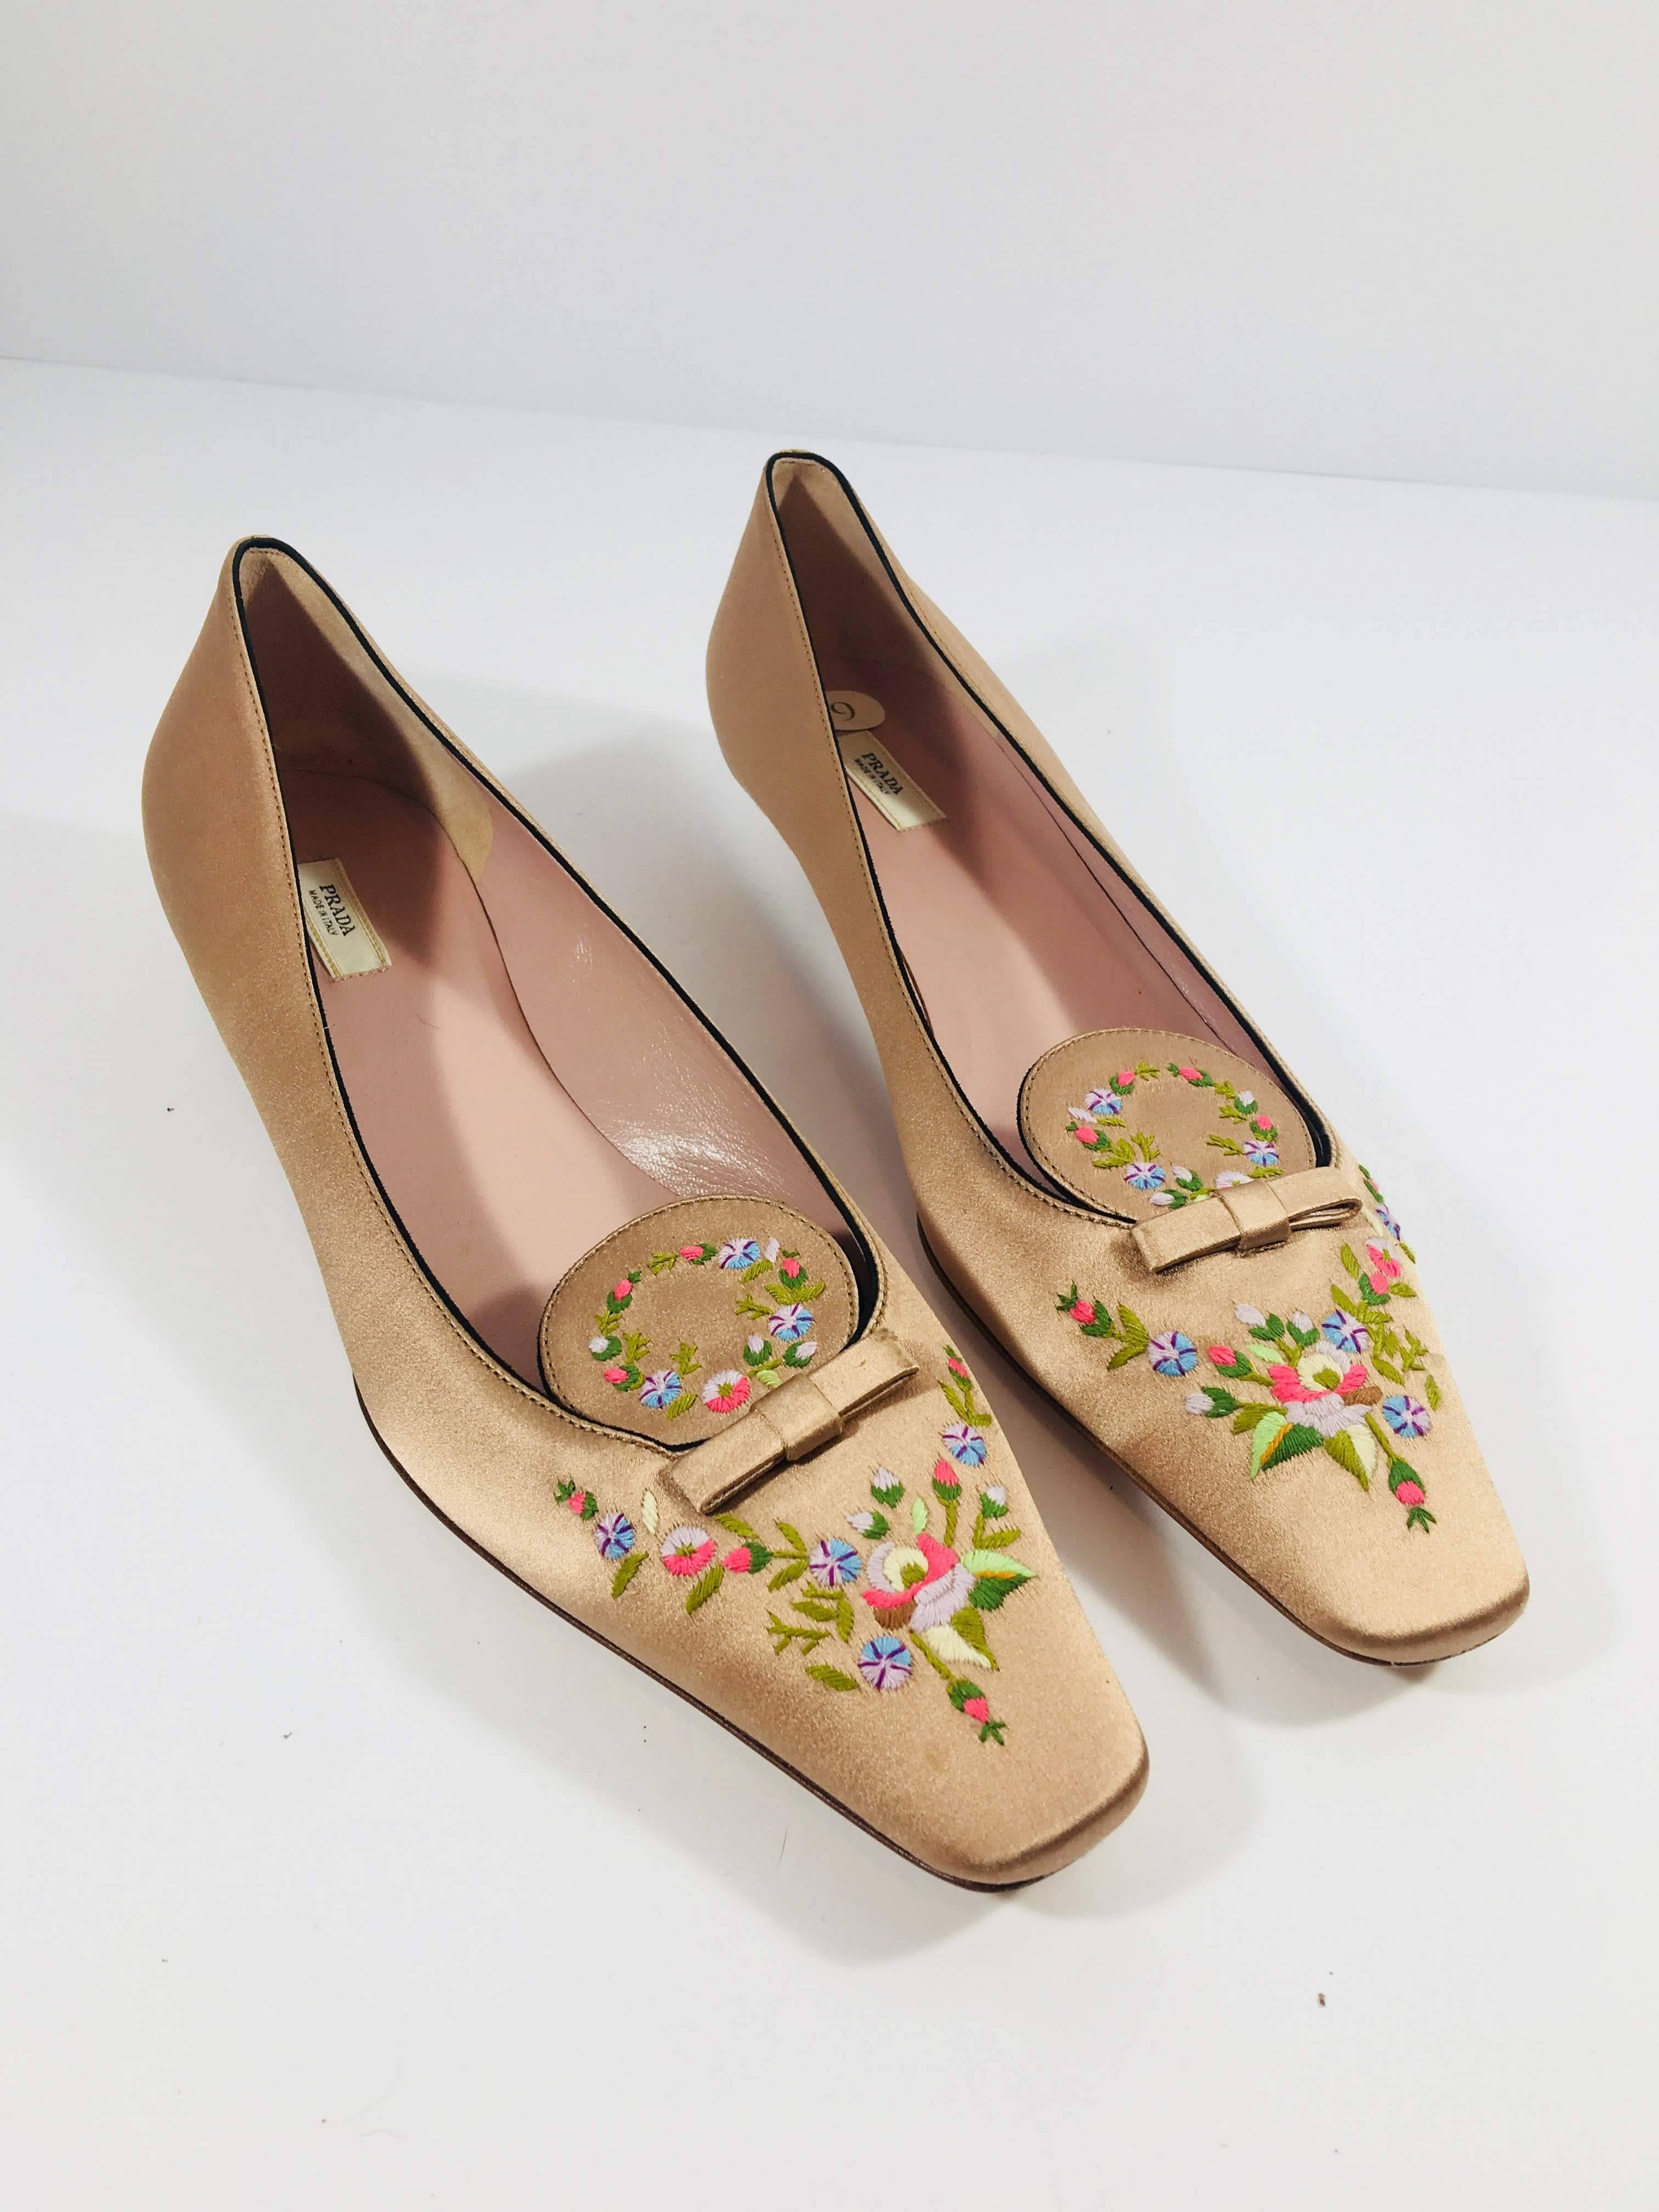 Prada Kitten Heels in Champagne Satin with Square Toe and Embroidered Floral Design Around Toe and Round  Tongue.